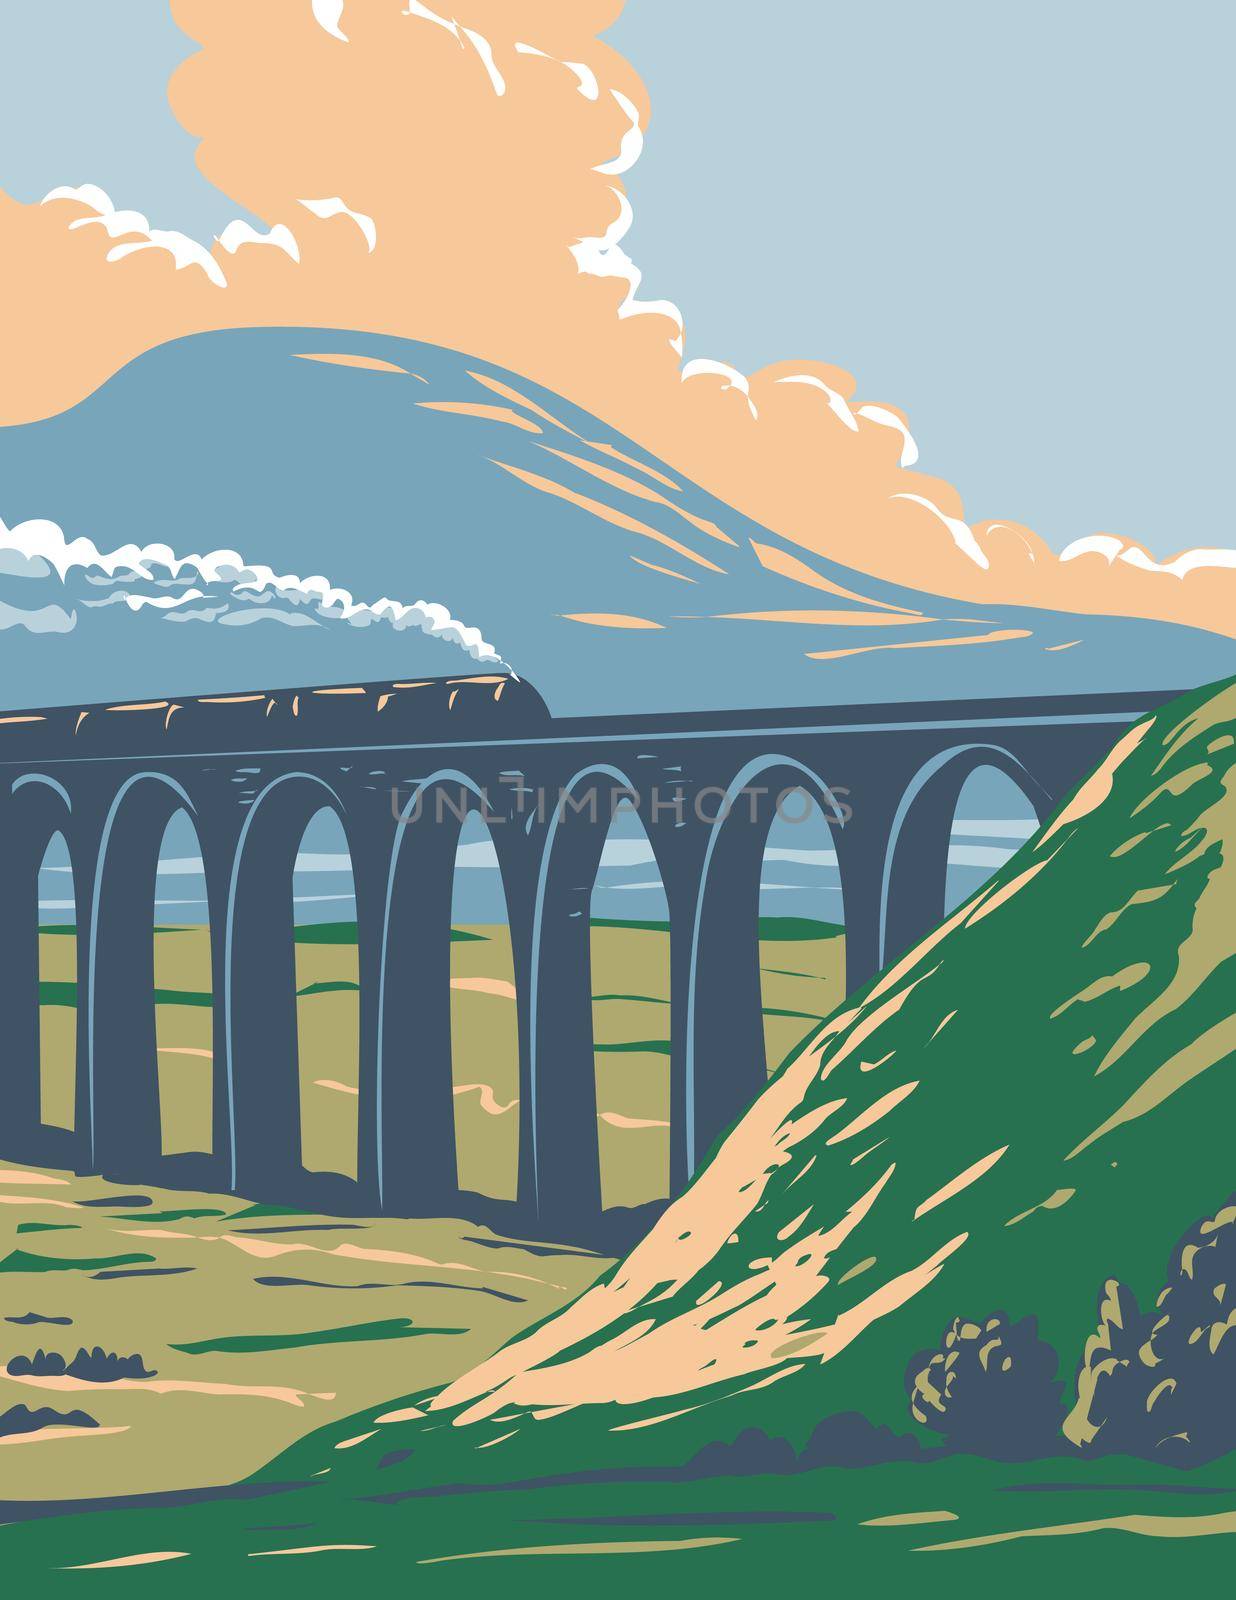 Steam Train on Railway Over Batty Moss or Ribblehead Viaduct in Yorkshire Dales National Park England UK Art Deco WPA Poster Art by patrimonio